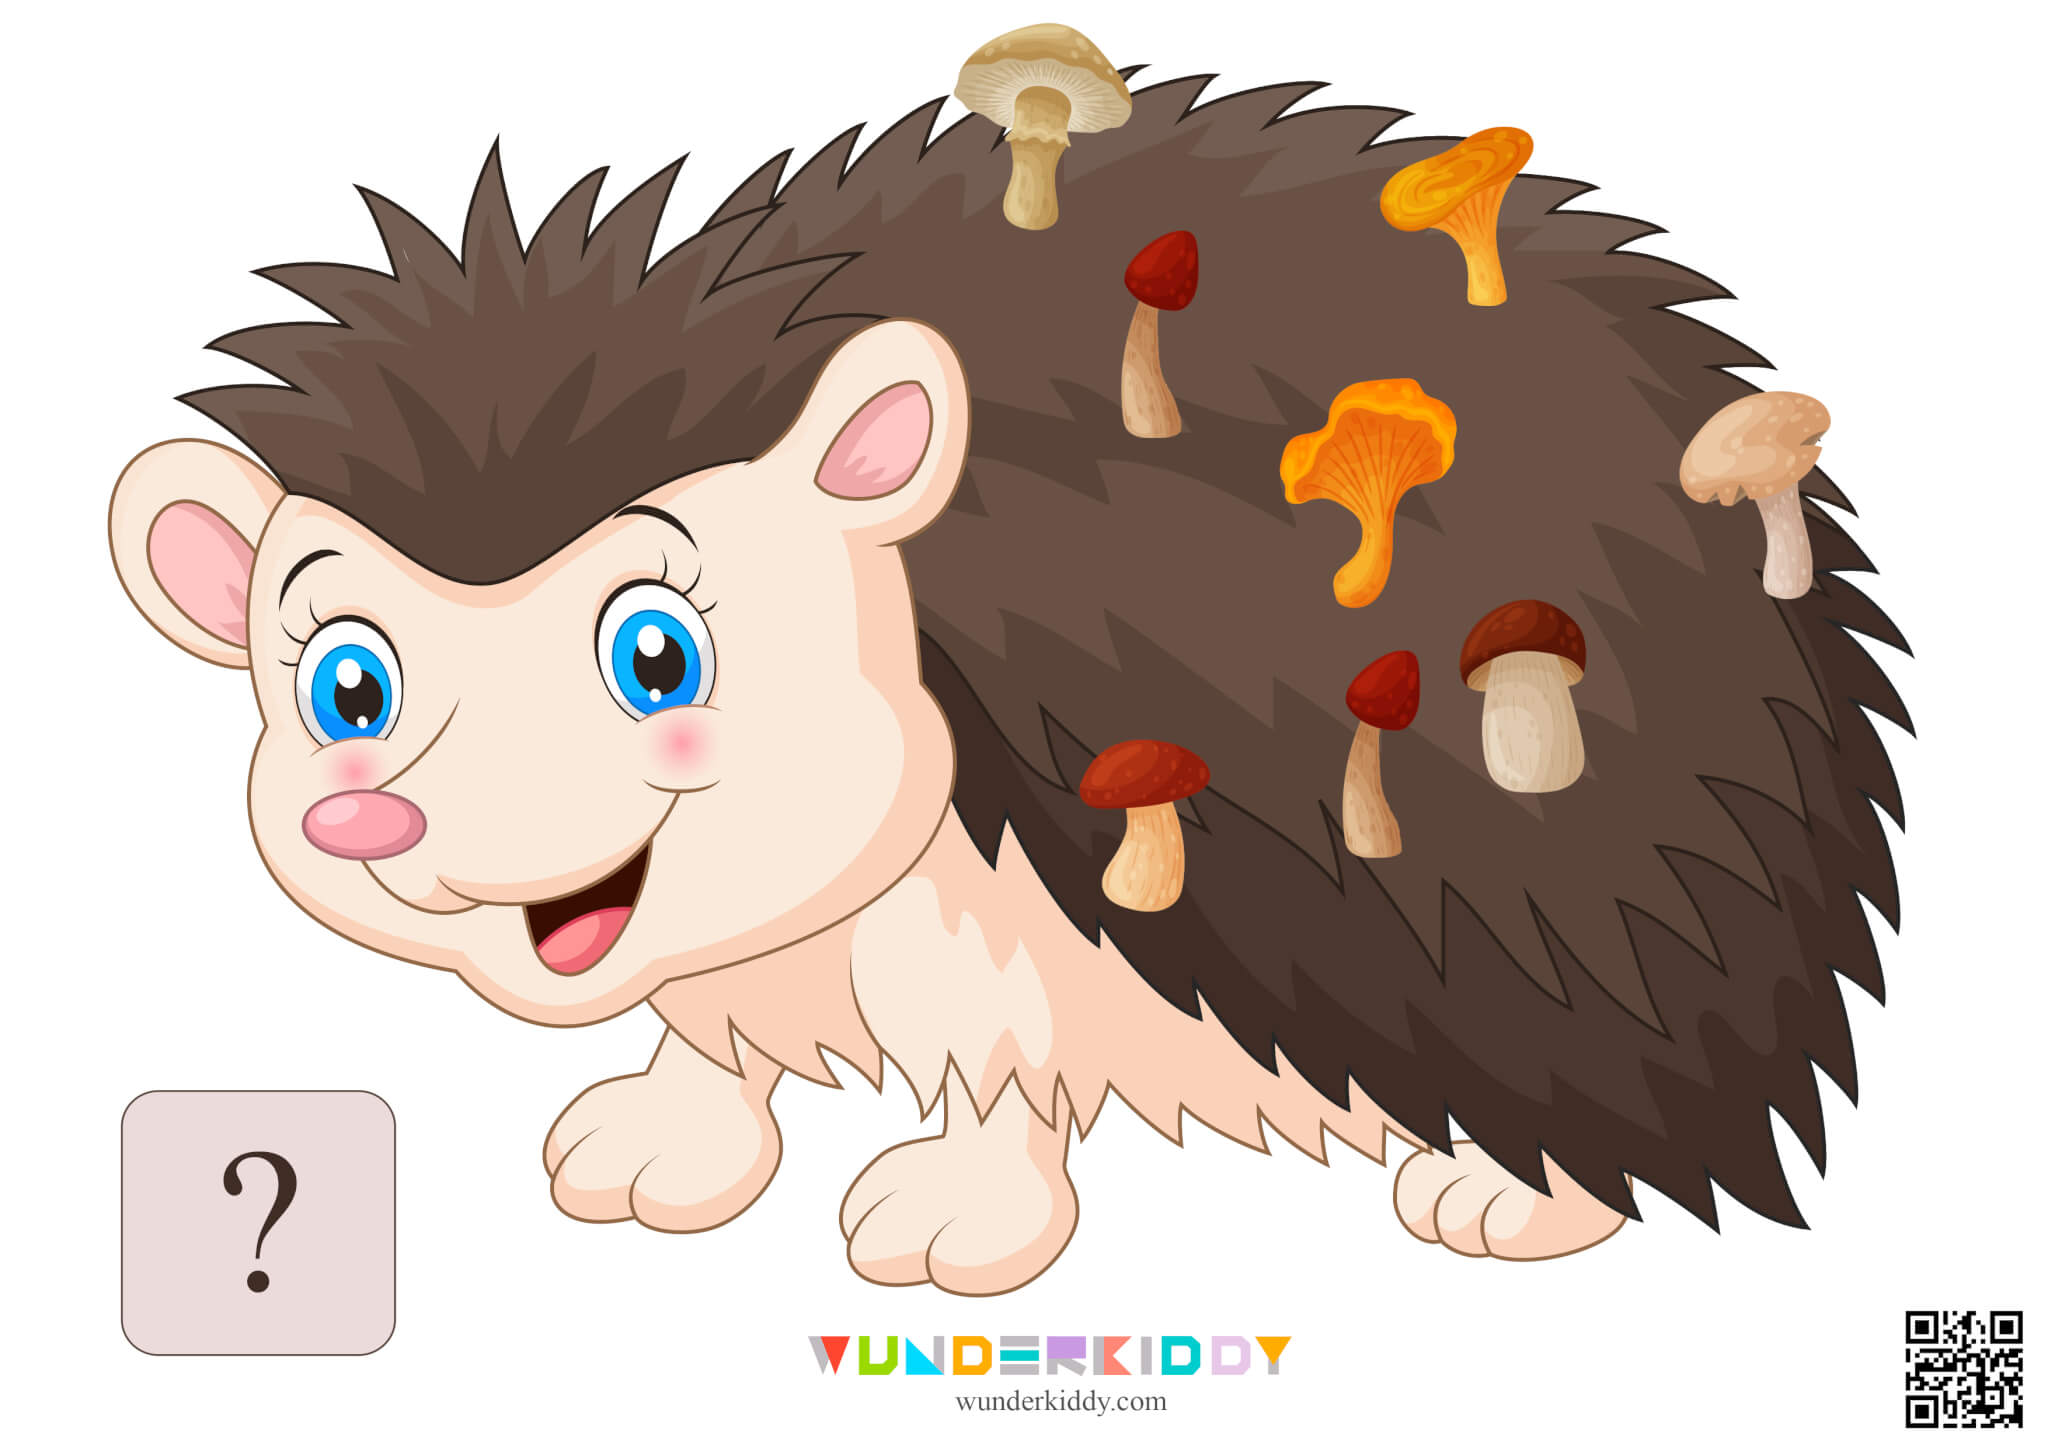 Worksheet Count to 20 with Hedgehog and Mushrooms - Image 12